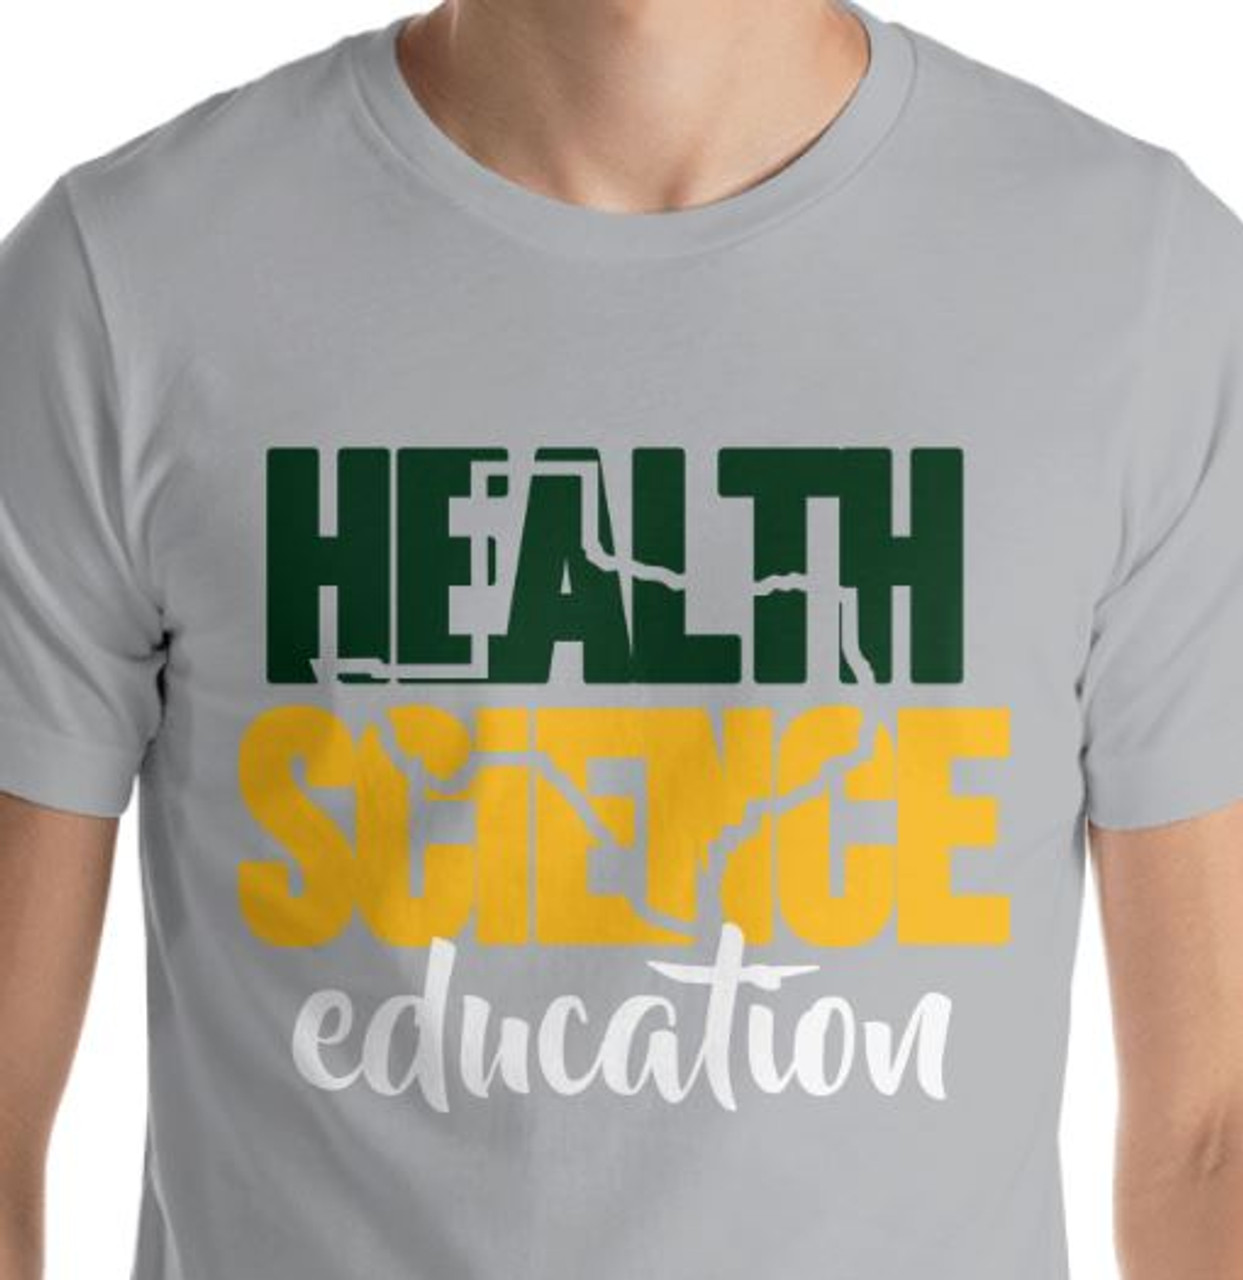 "Texas Health Science" Green, Gold and White